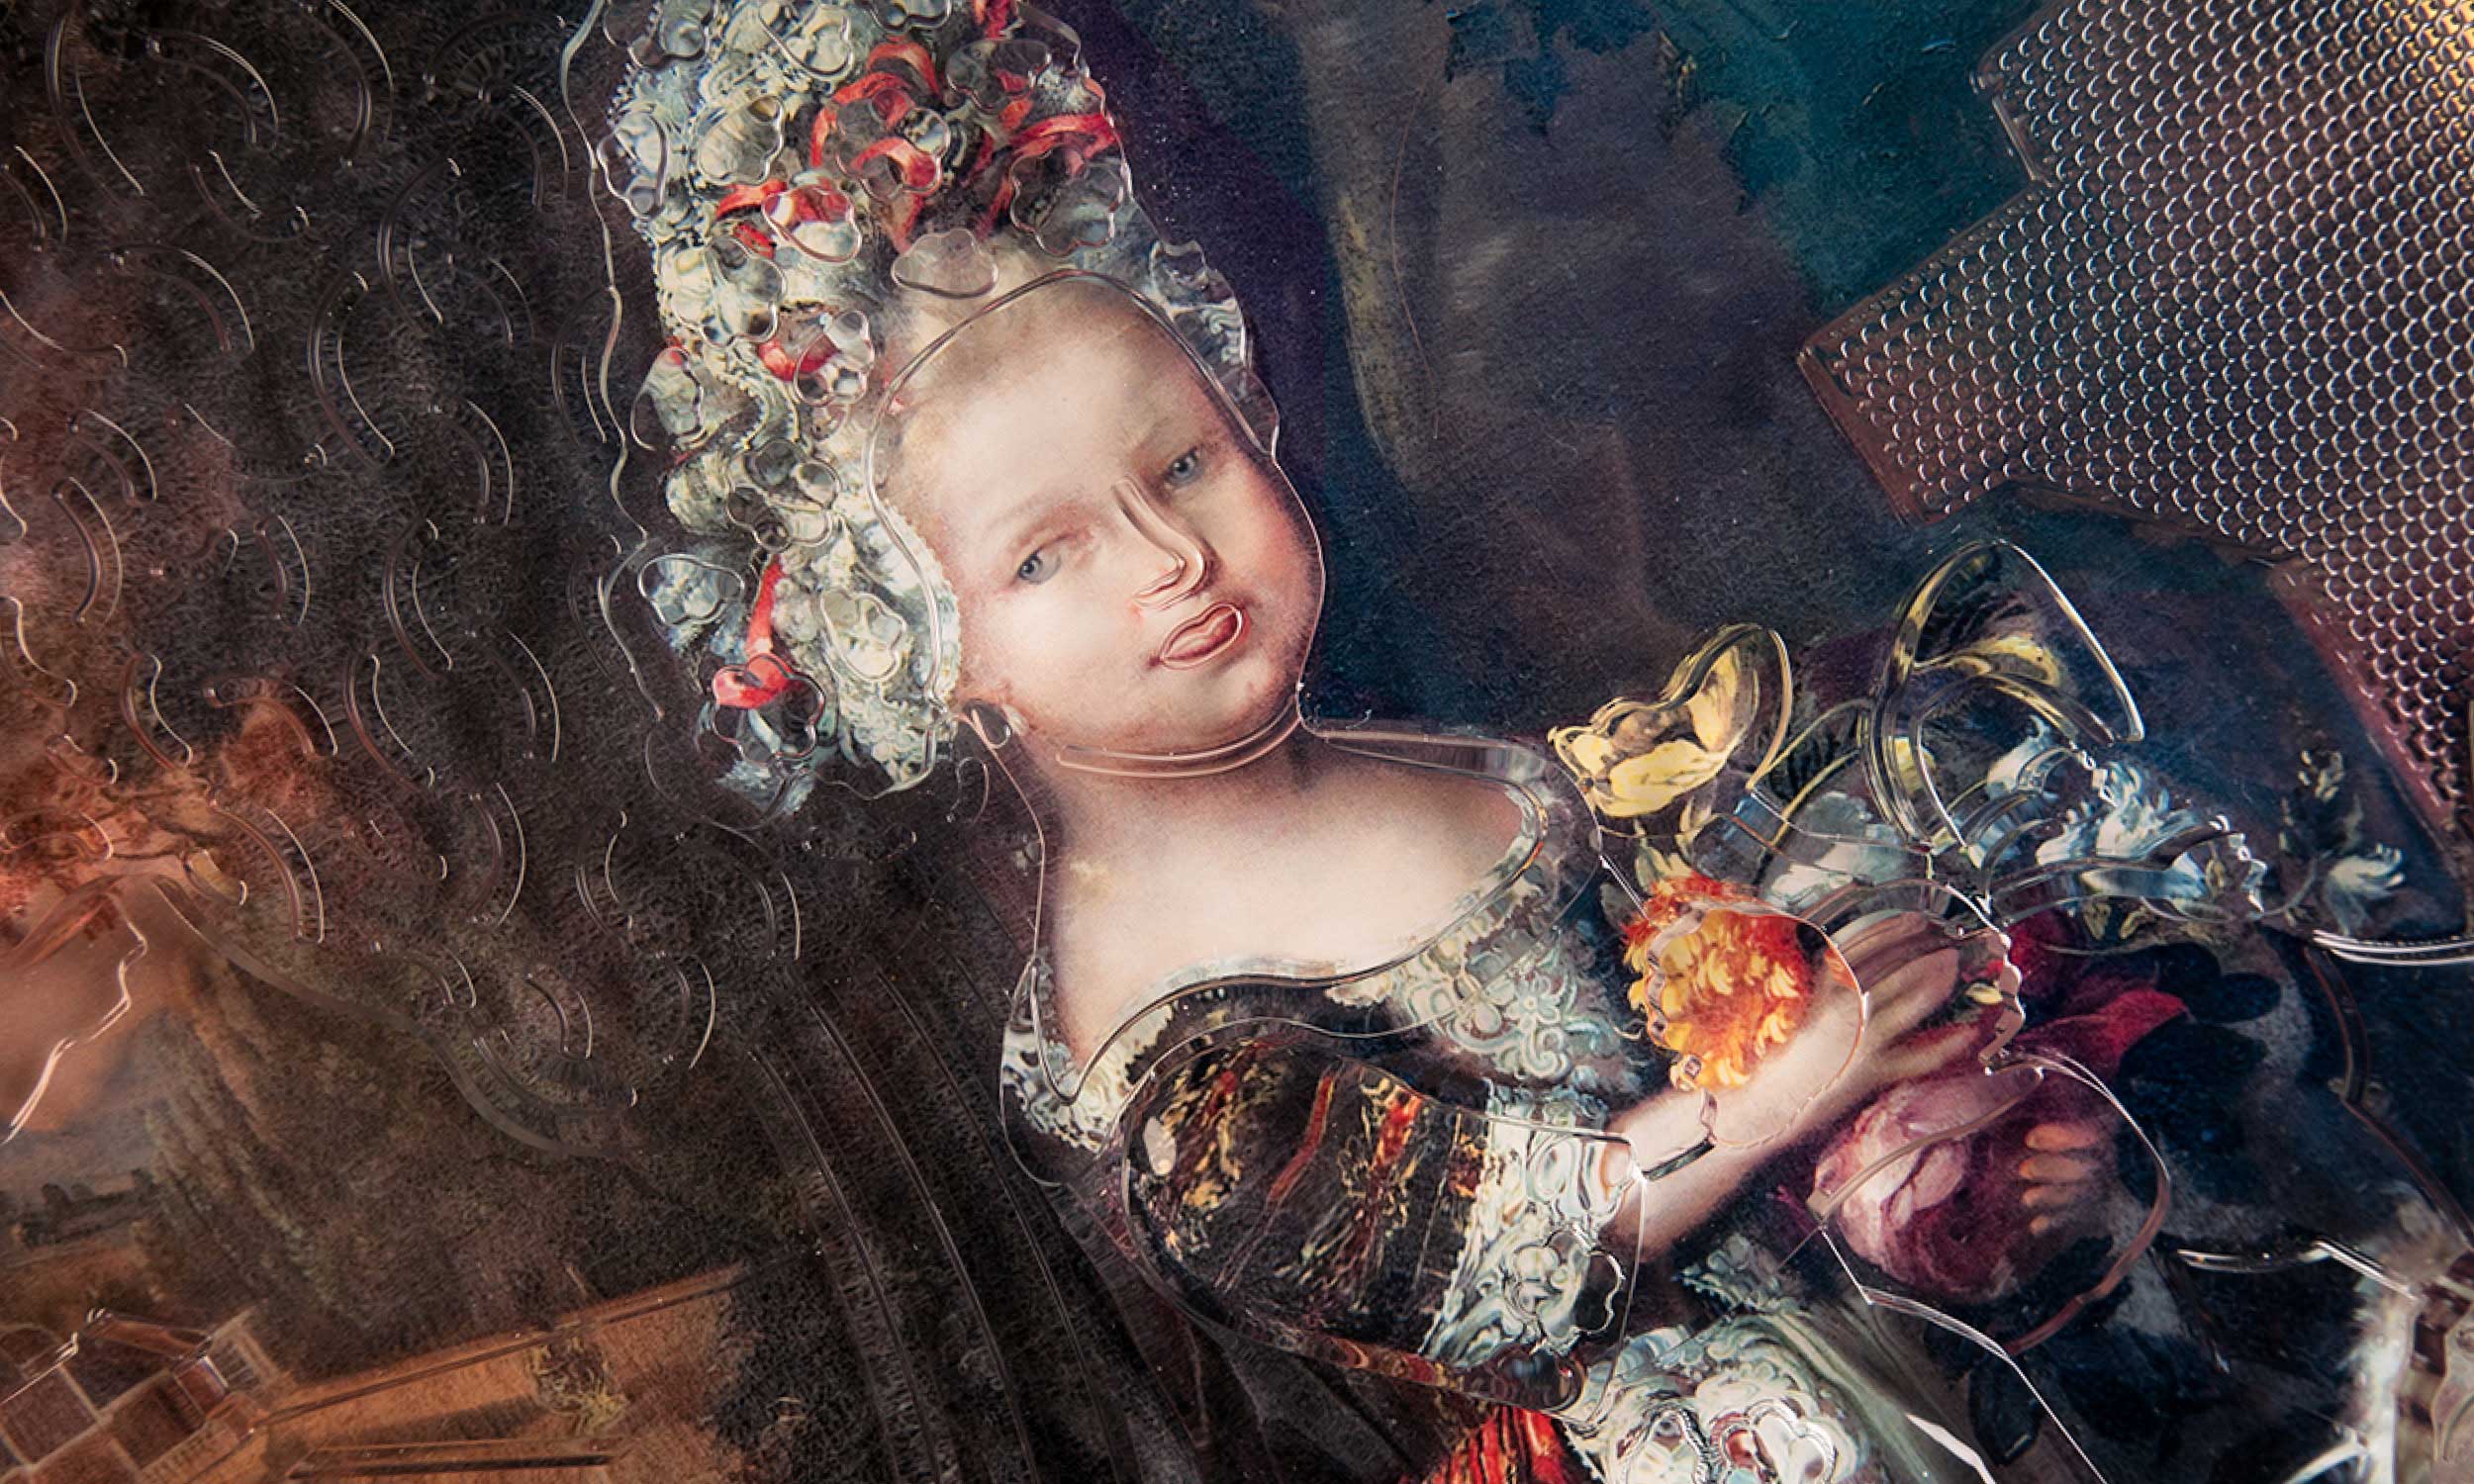 Photo of a detail of the touch painting "The little princess" showing the festively dressed girl with a bouquet of flowers